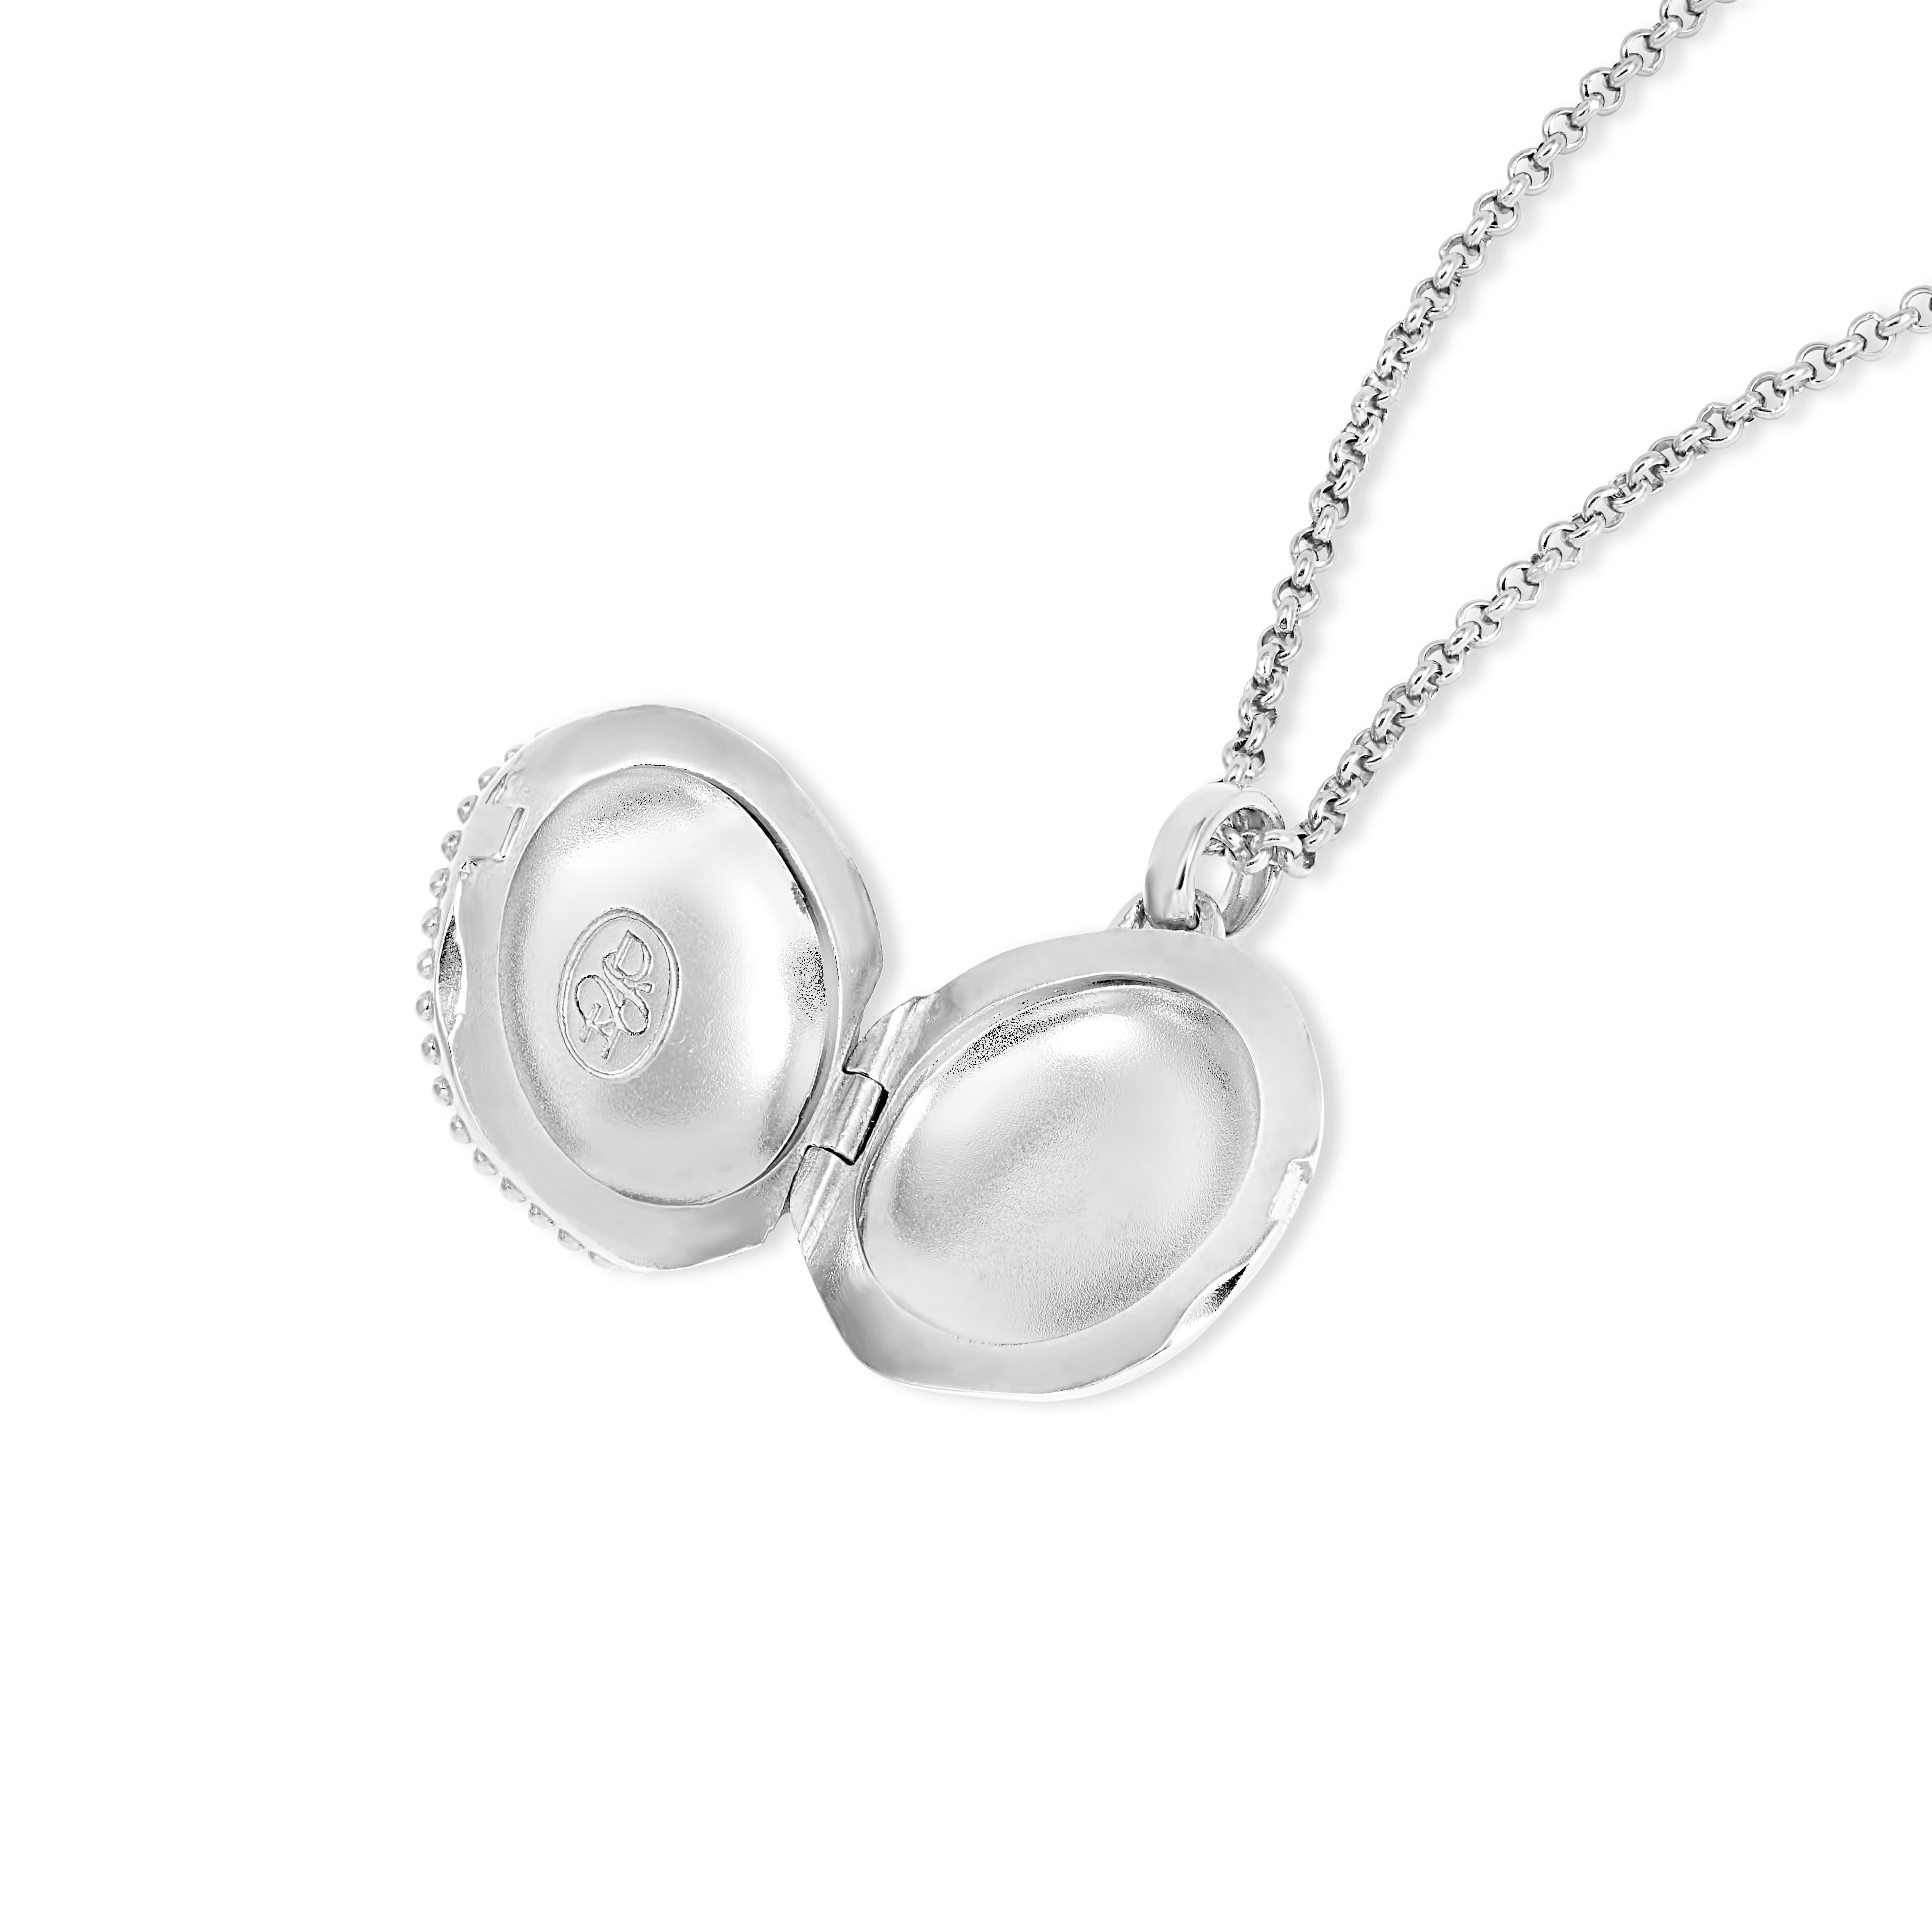 Chart the course for your next adventure with our sterling silver 'True North' locket, set with a sparkling diamond in the centre. Add engraving - choose the name or map coordinates of a special place, important dates, initials of loved ones or even